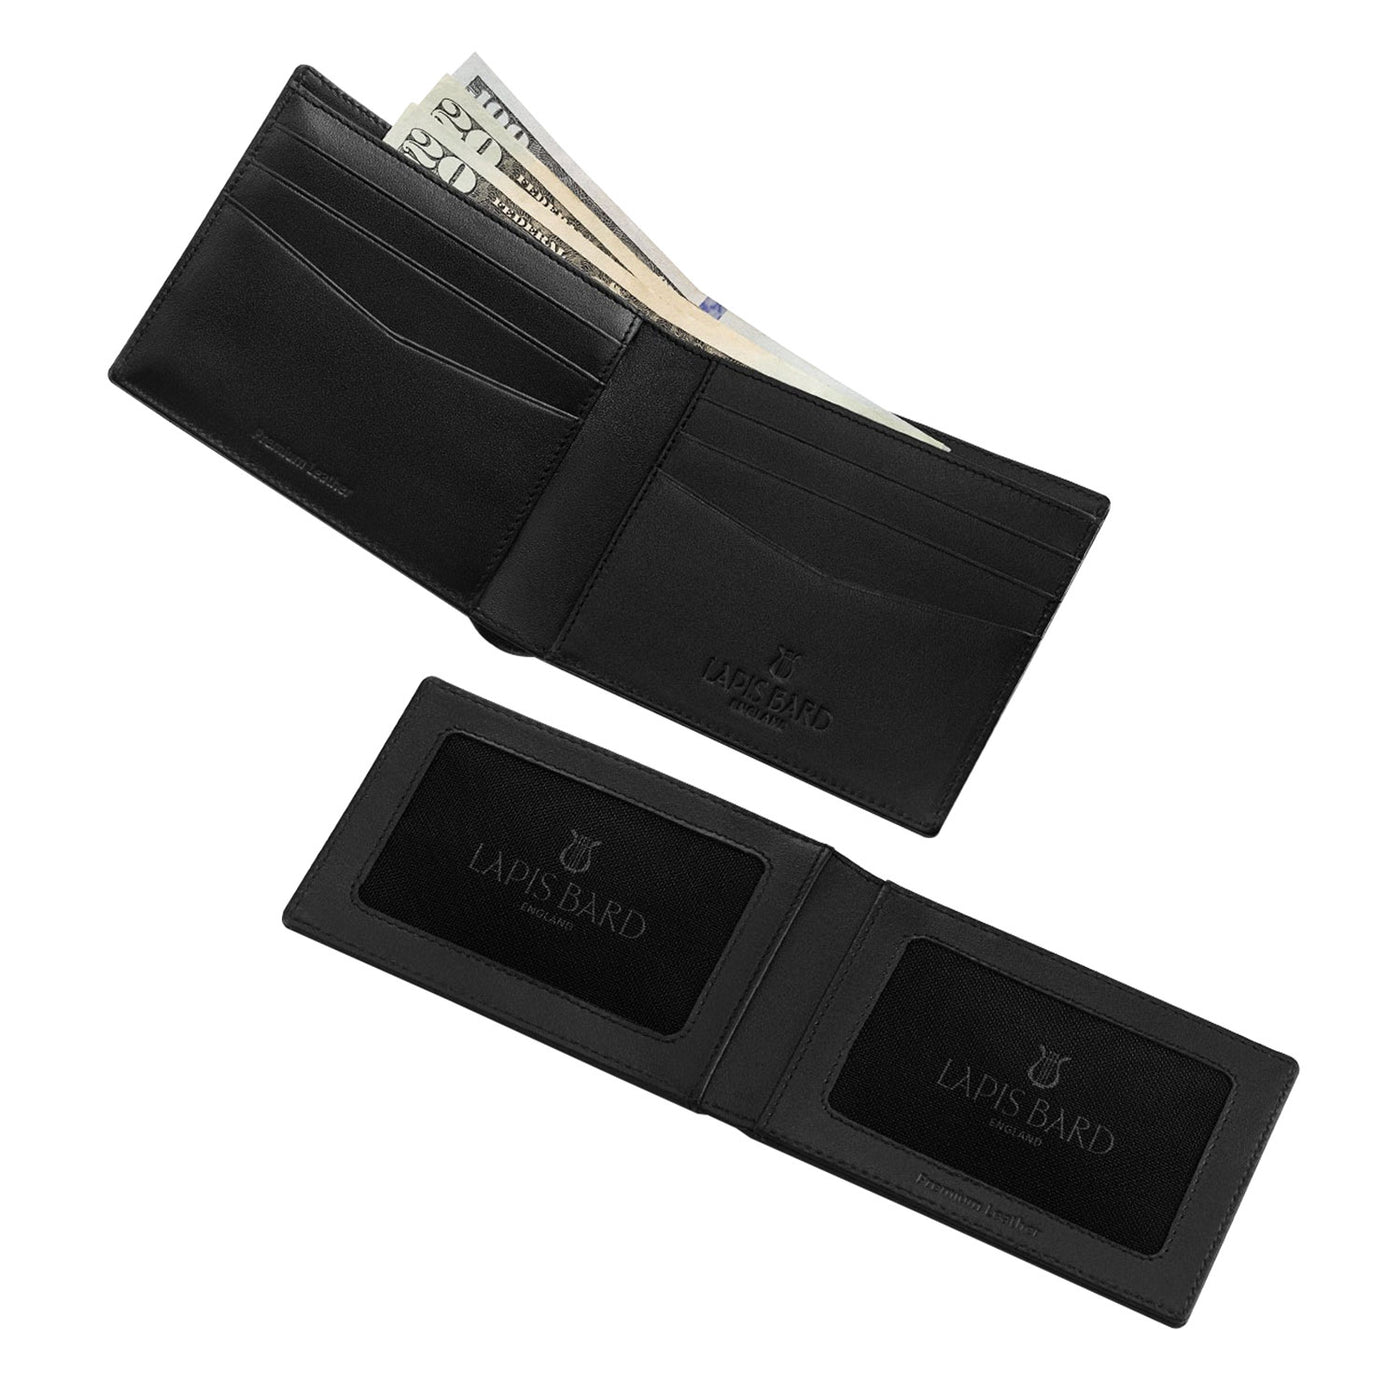 Lapis Bard Mayfair Bifold 6cc Wallet with Additional Sleeve - Black